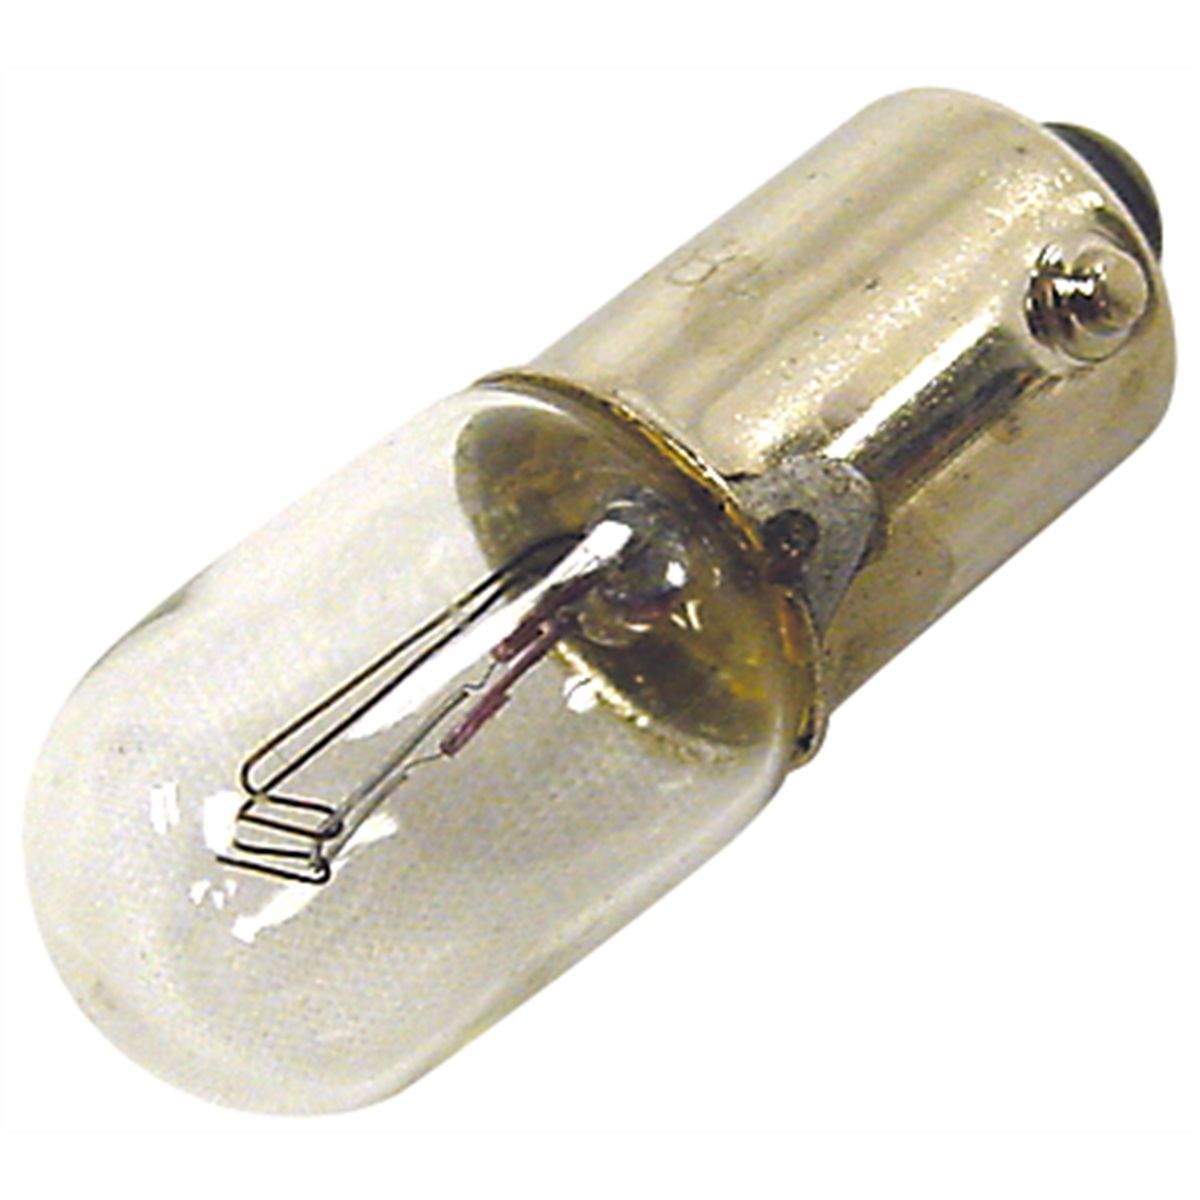 Replacement Bulb For Model 27000 Heavy Duty Circuit Tester